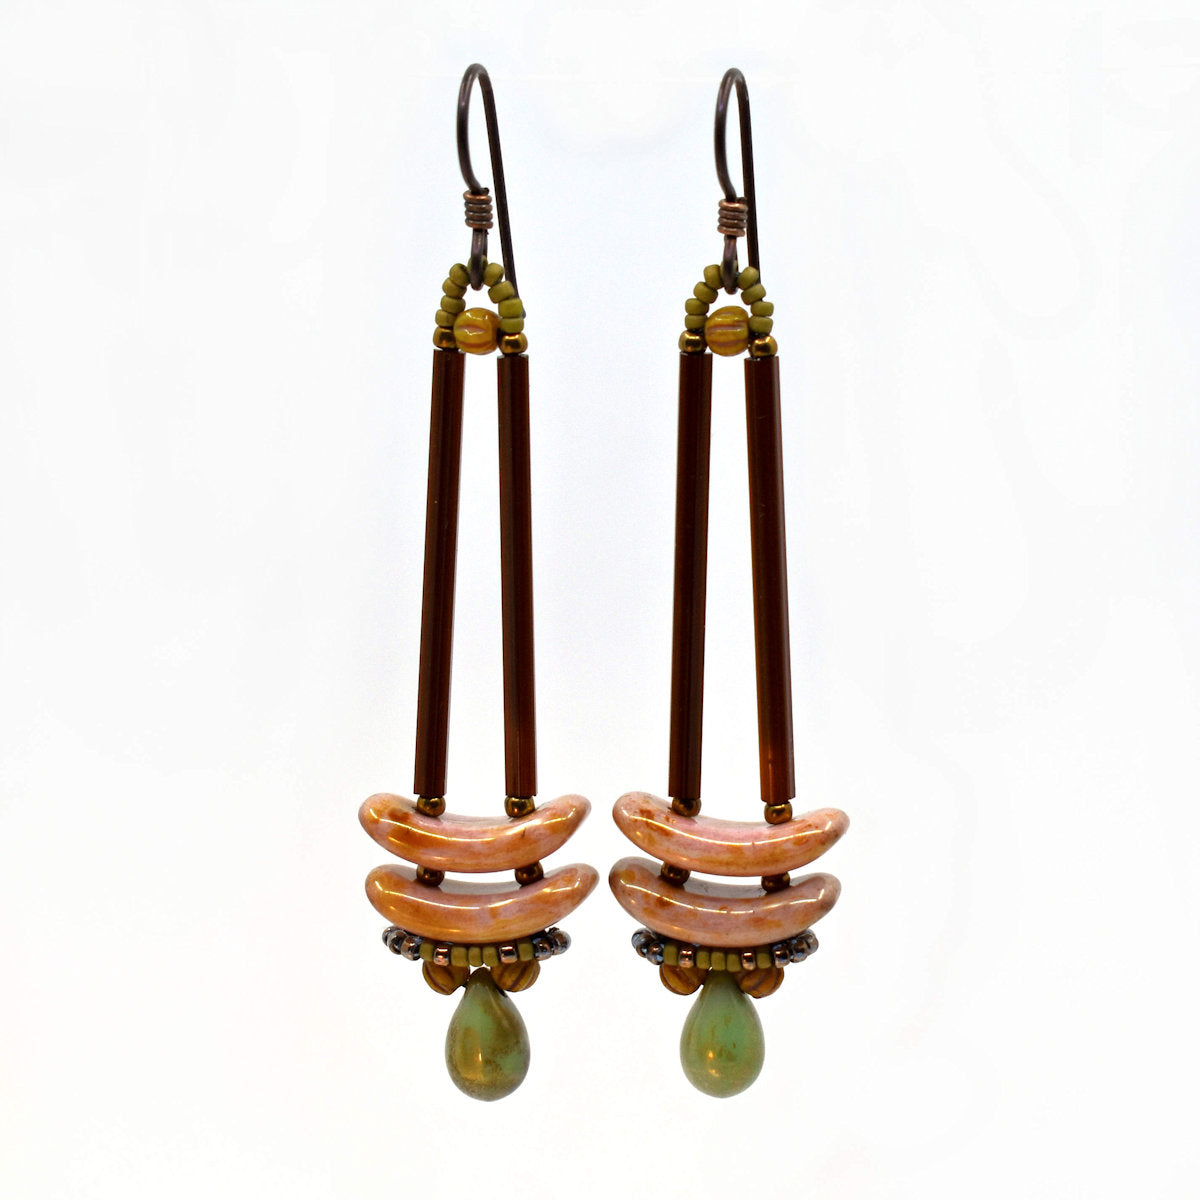 Earrings that look similar to a medicine dropper lay on a white backround. There are two long, brown beads forming narrow vertical columns ending at the top of two speckled pink stacked arc shaped beads. At the bottom is a matte speckled turquoise green drop shaped bead, surrounded by a belt of matte gold seed beads.